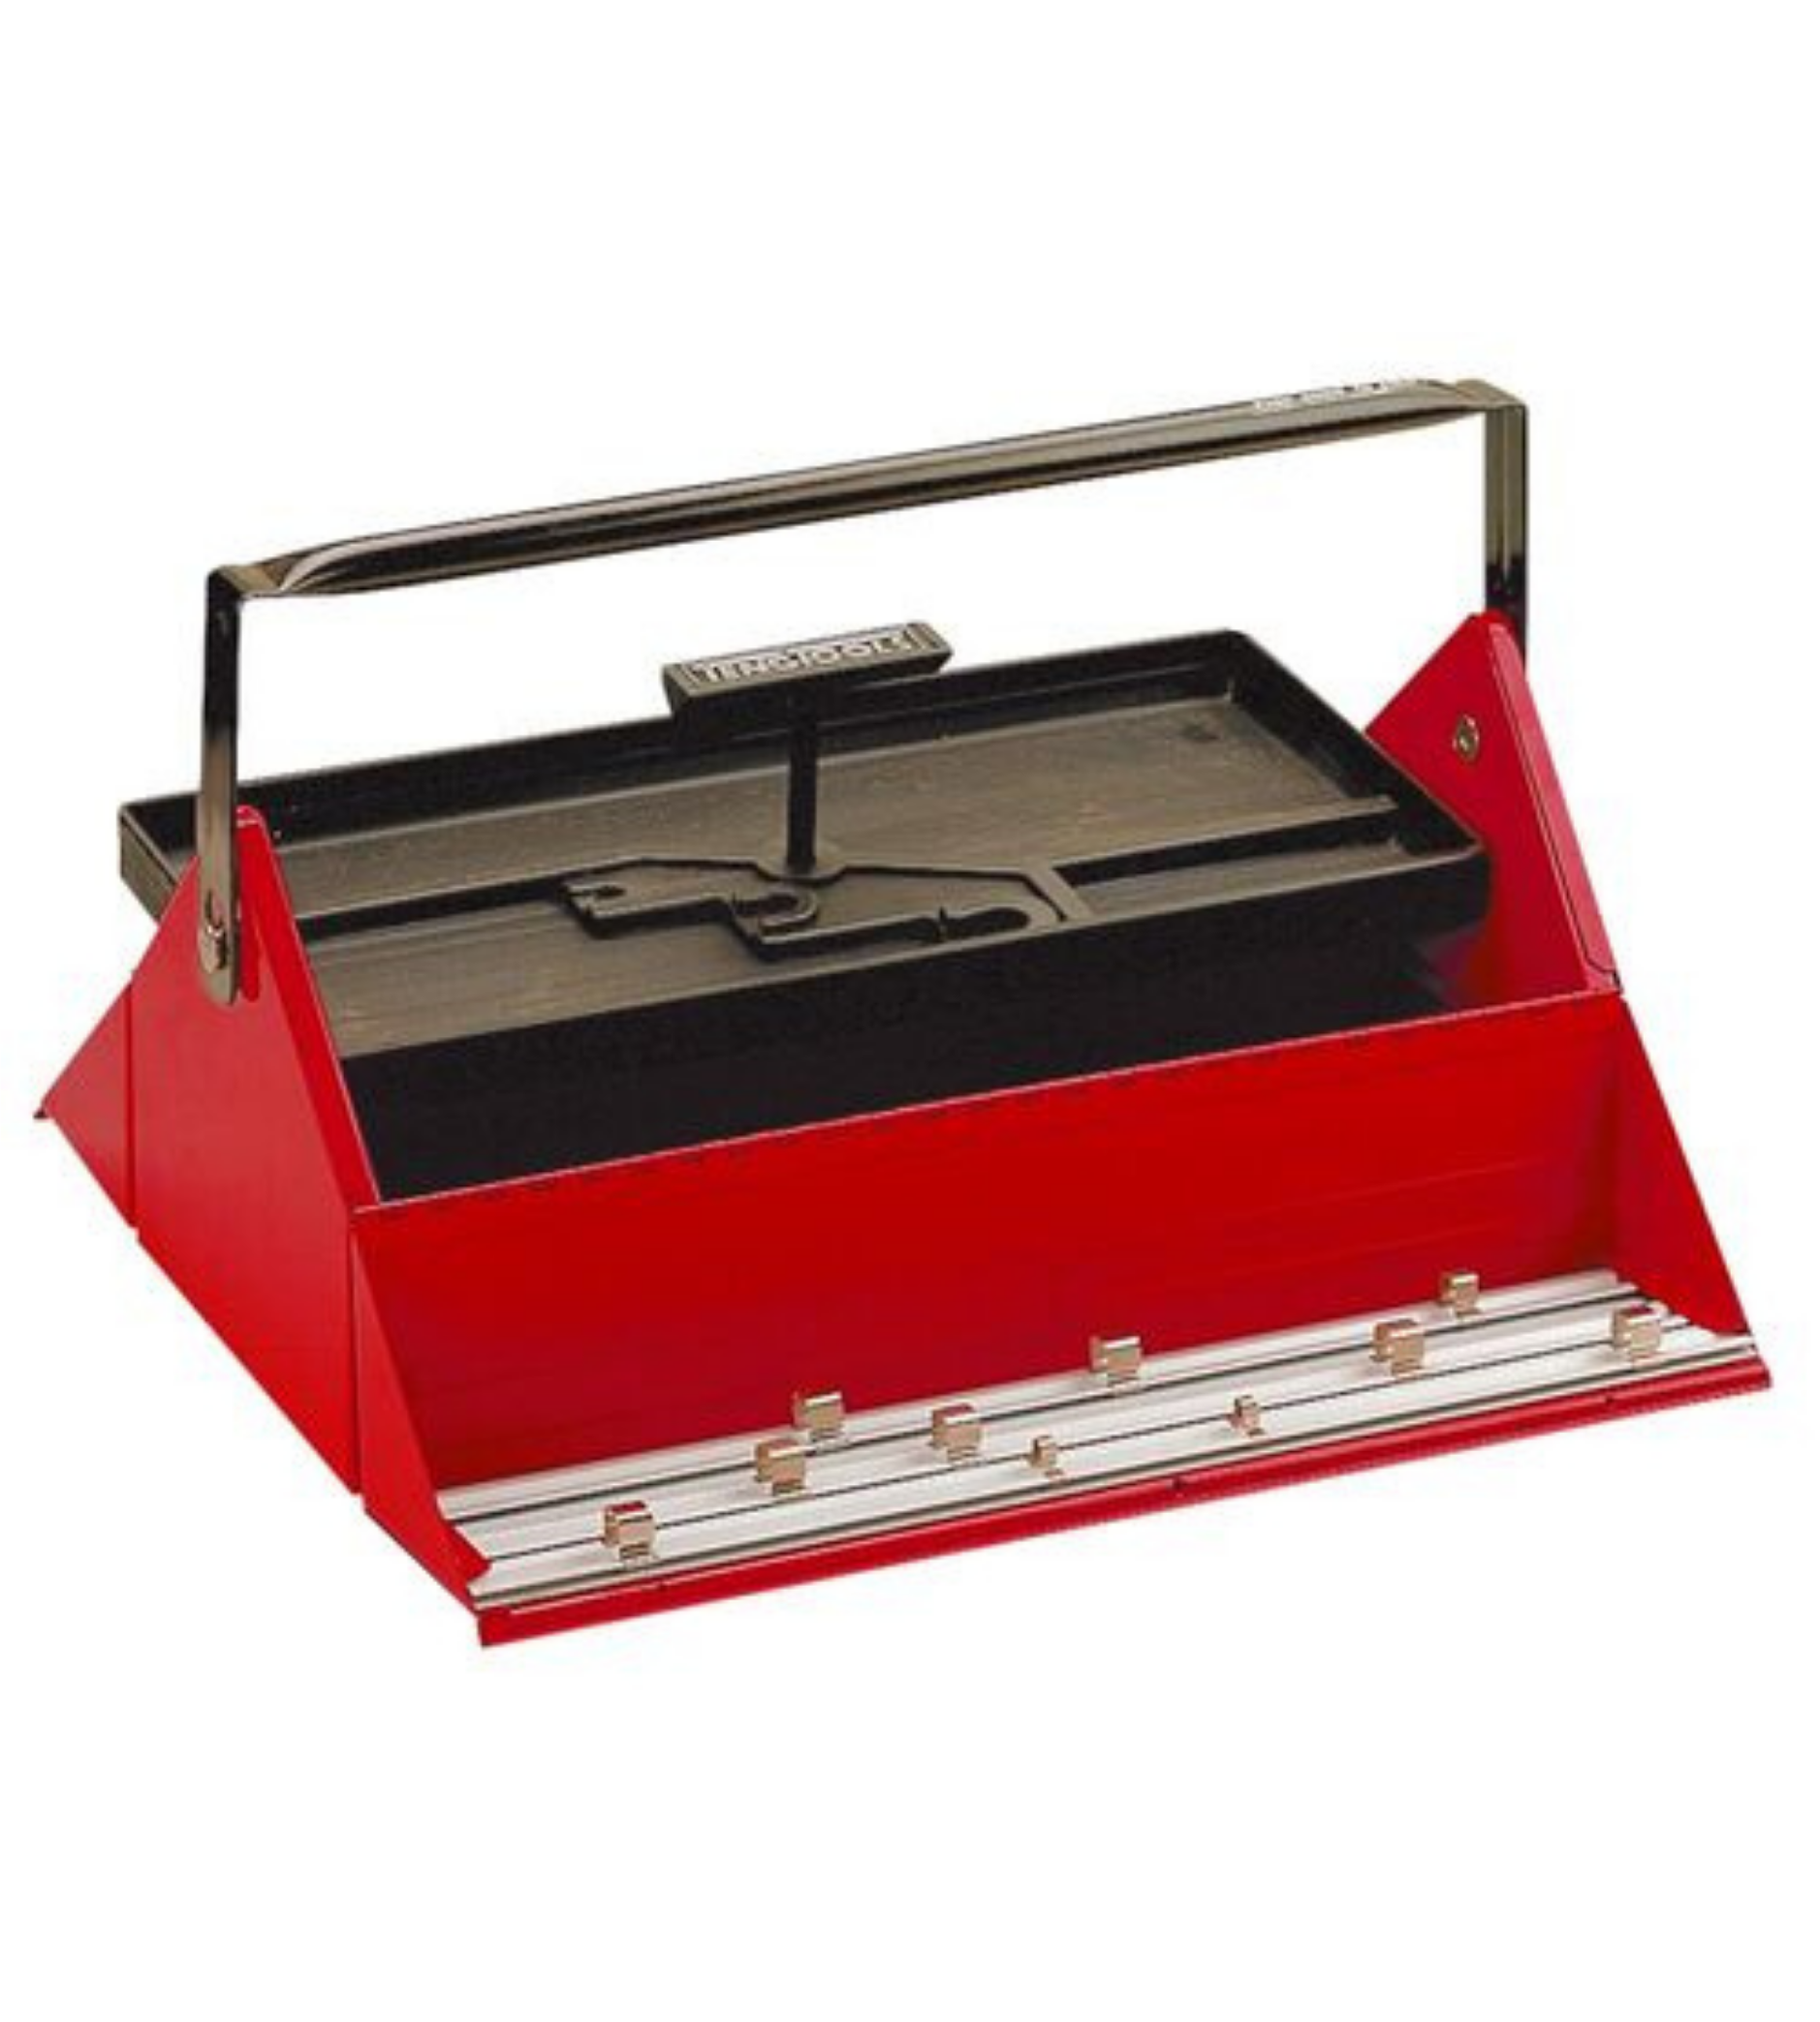 Teng Tools 17.7 Inch Steel Cantilever Barn Style Empty Portable Tool Box (With Socket Clips And Rails) - TC450